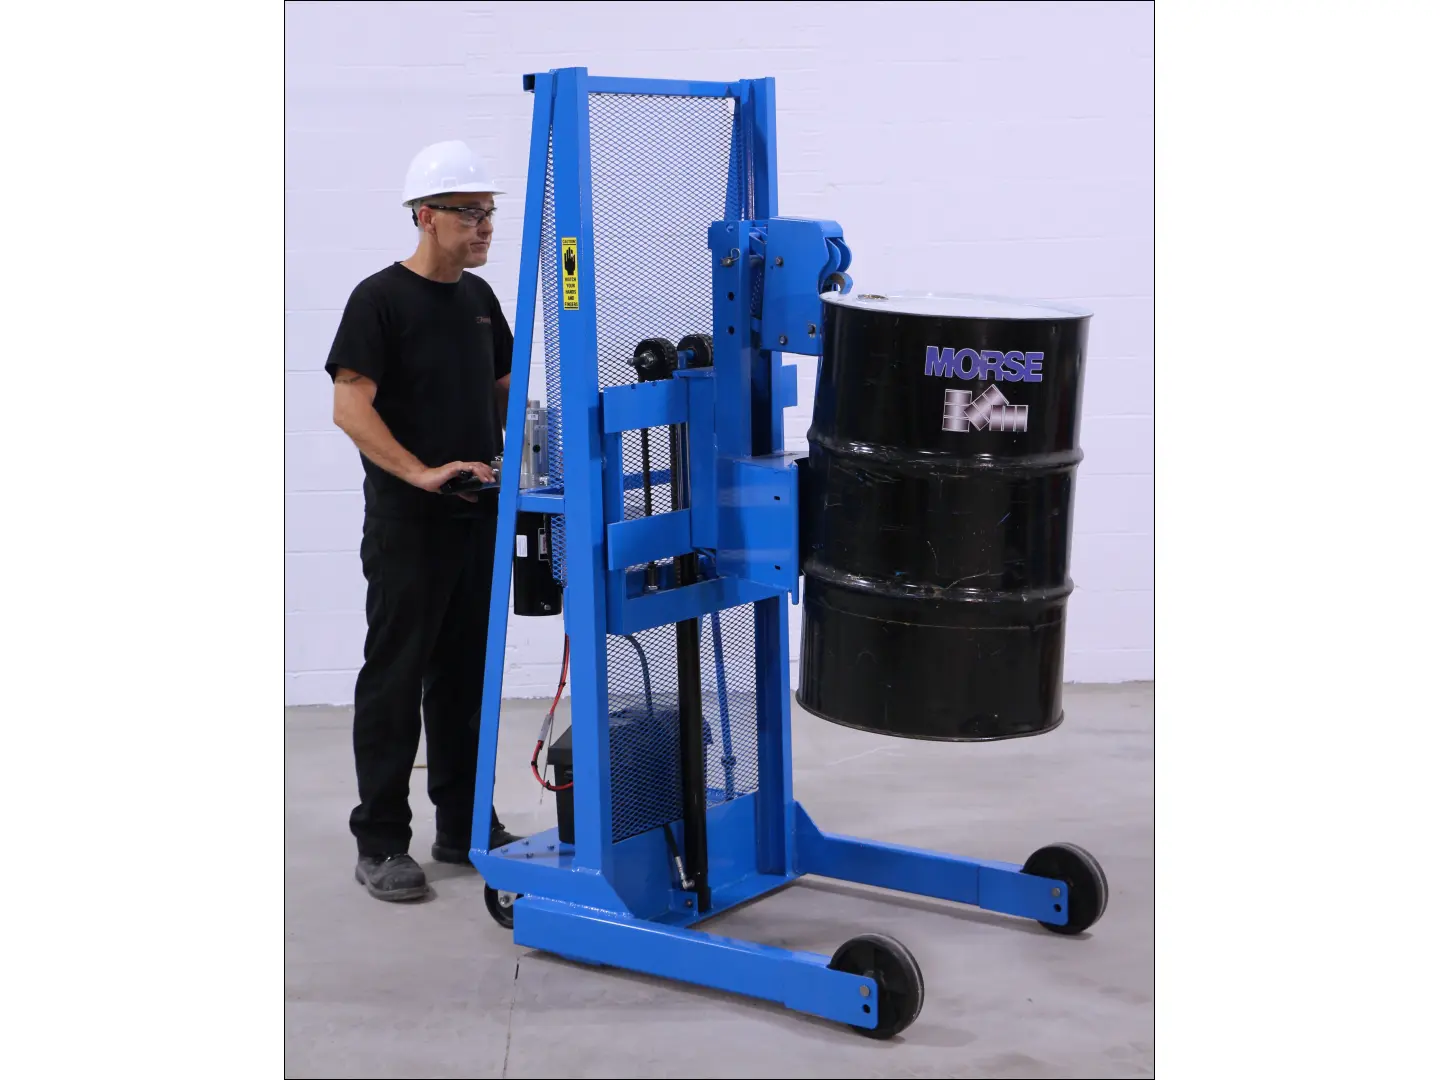 MORSPEED Drum Stacker lift to lift, move and stack an upright drum up to 45" (114 cm) high - Model 512-125 shown